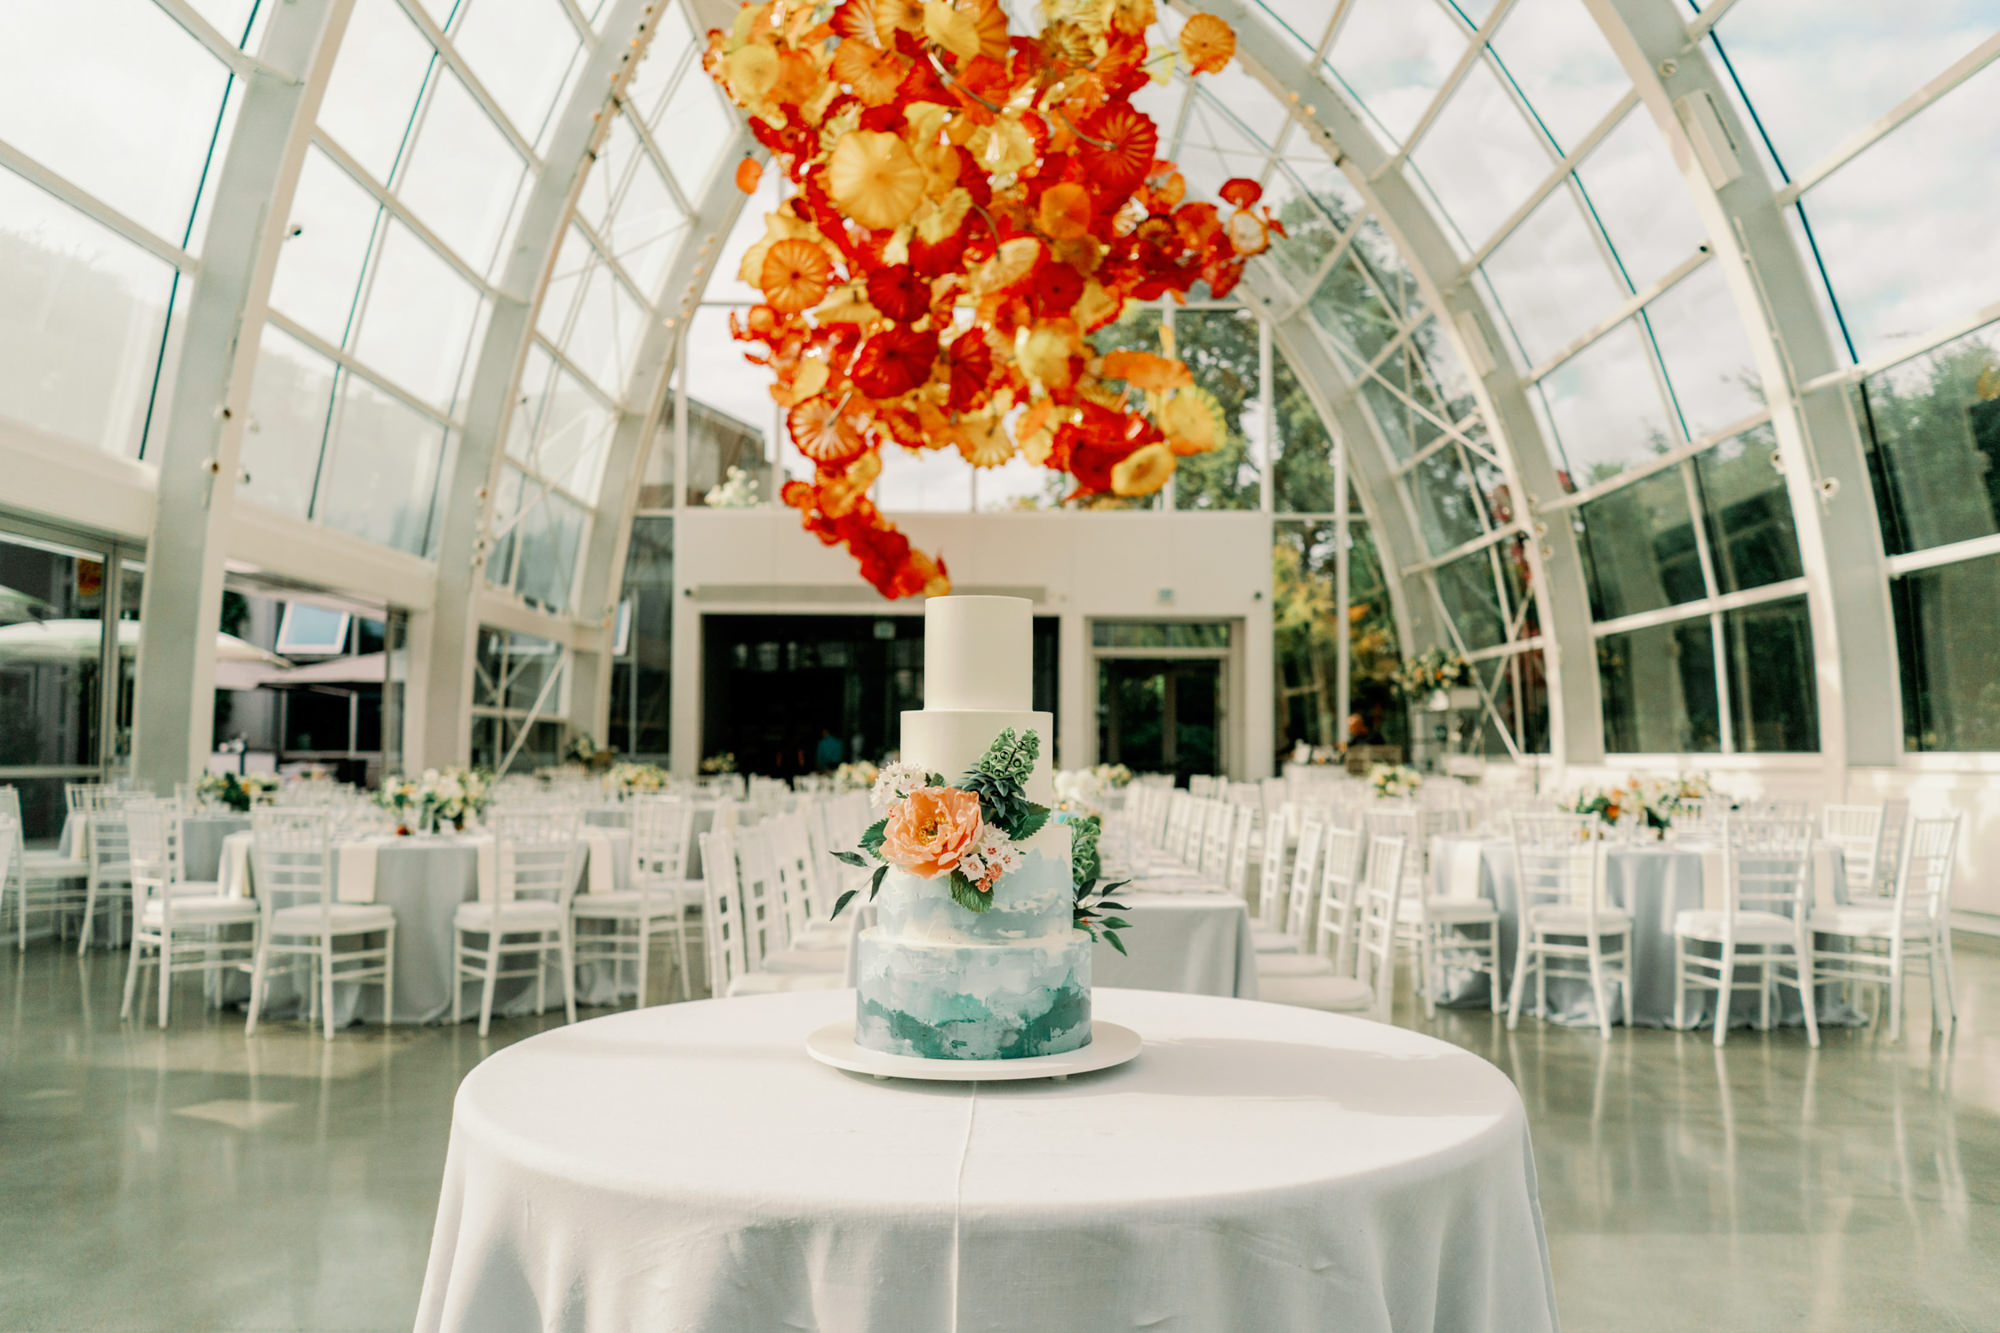 Chihuly Garden and Glass Seattle weddings: Tennie and Shane's wedding cake by Honeycrumb Studios